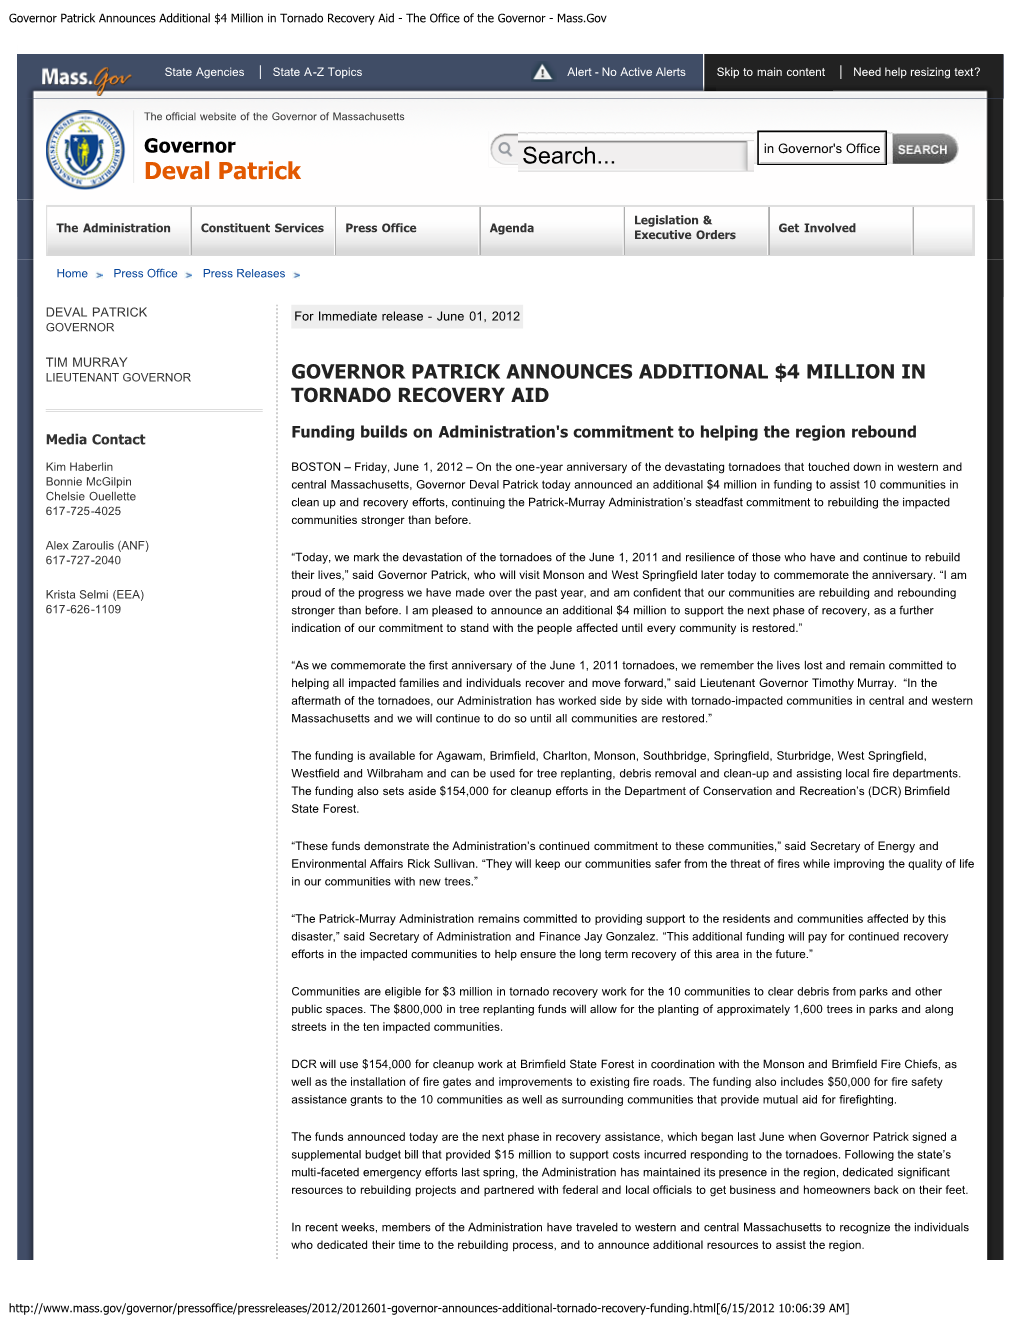 Governor Patrick Announces Additional $4 Million in Tornado Recovery Aid - the Office of the Governor - Mass.Gov